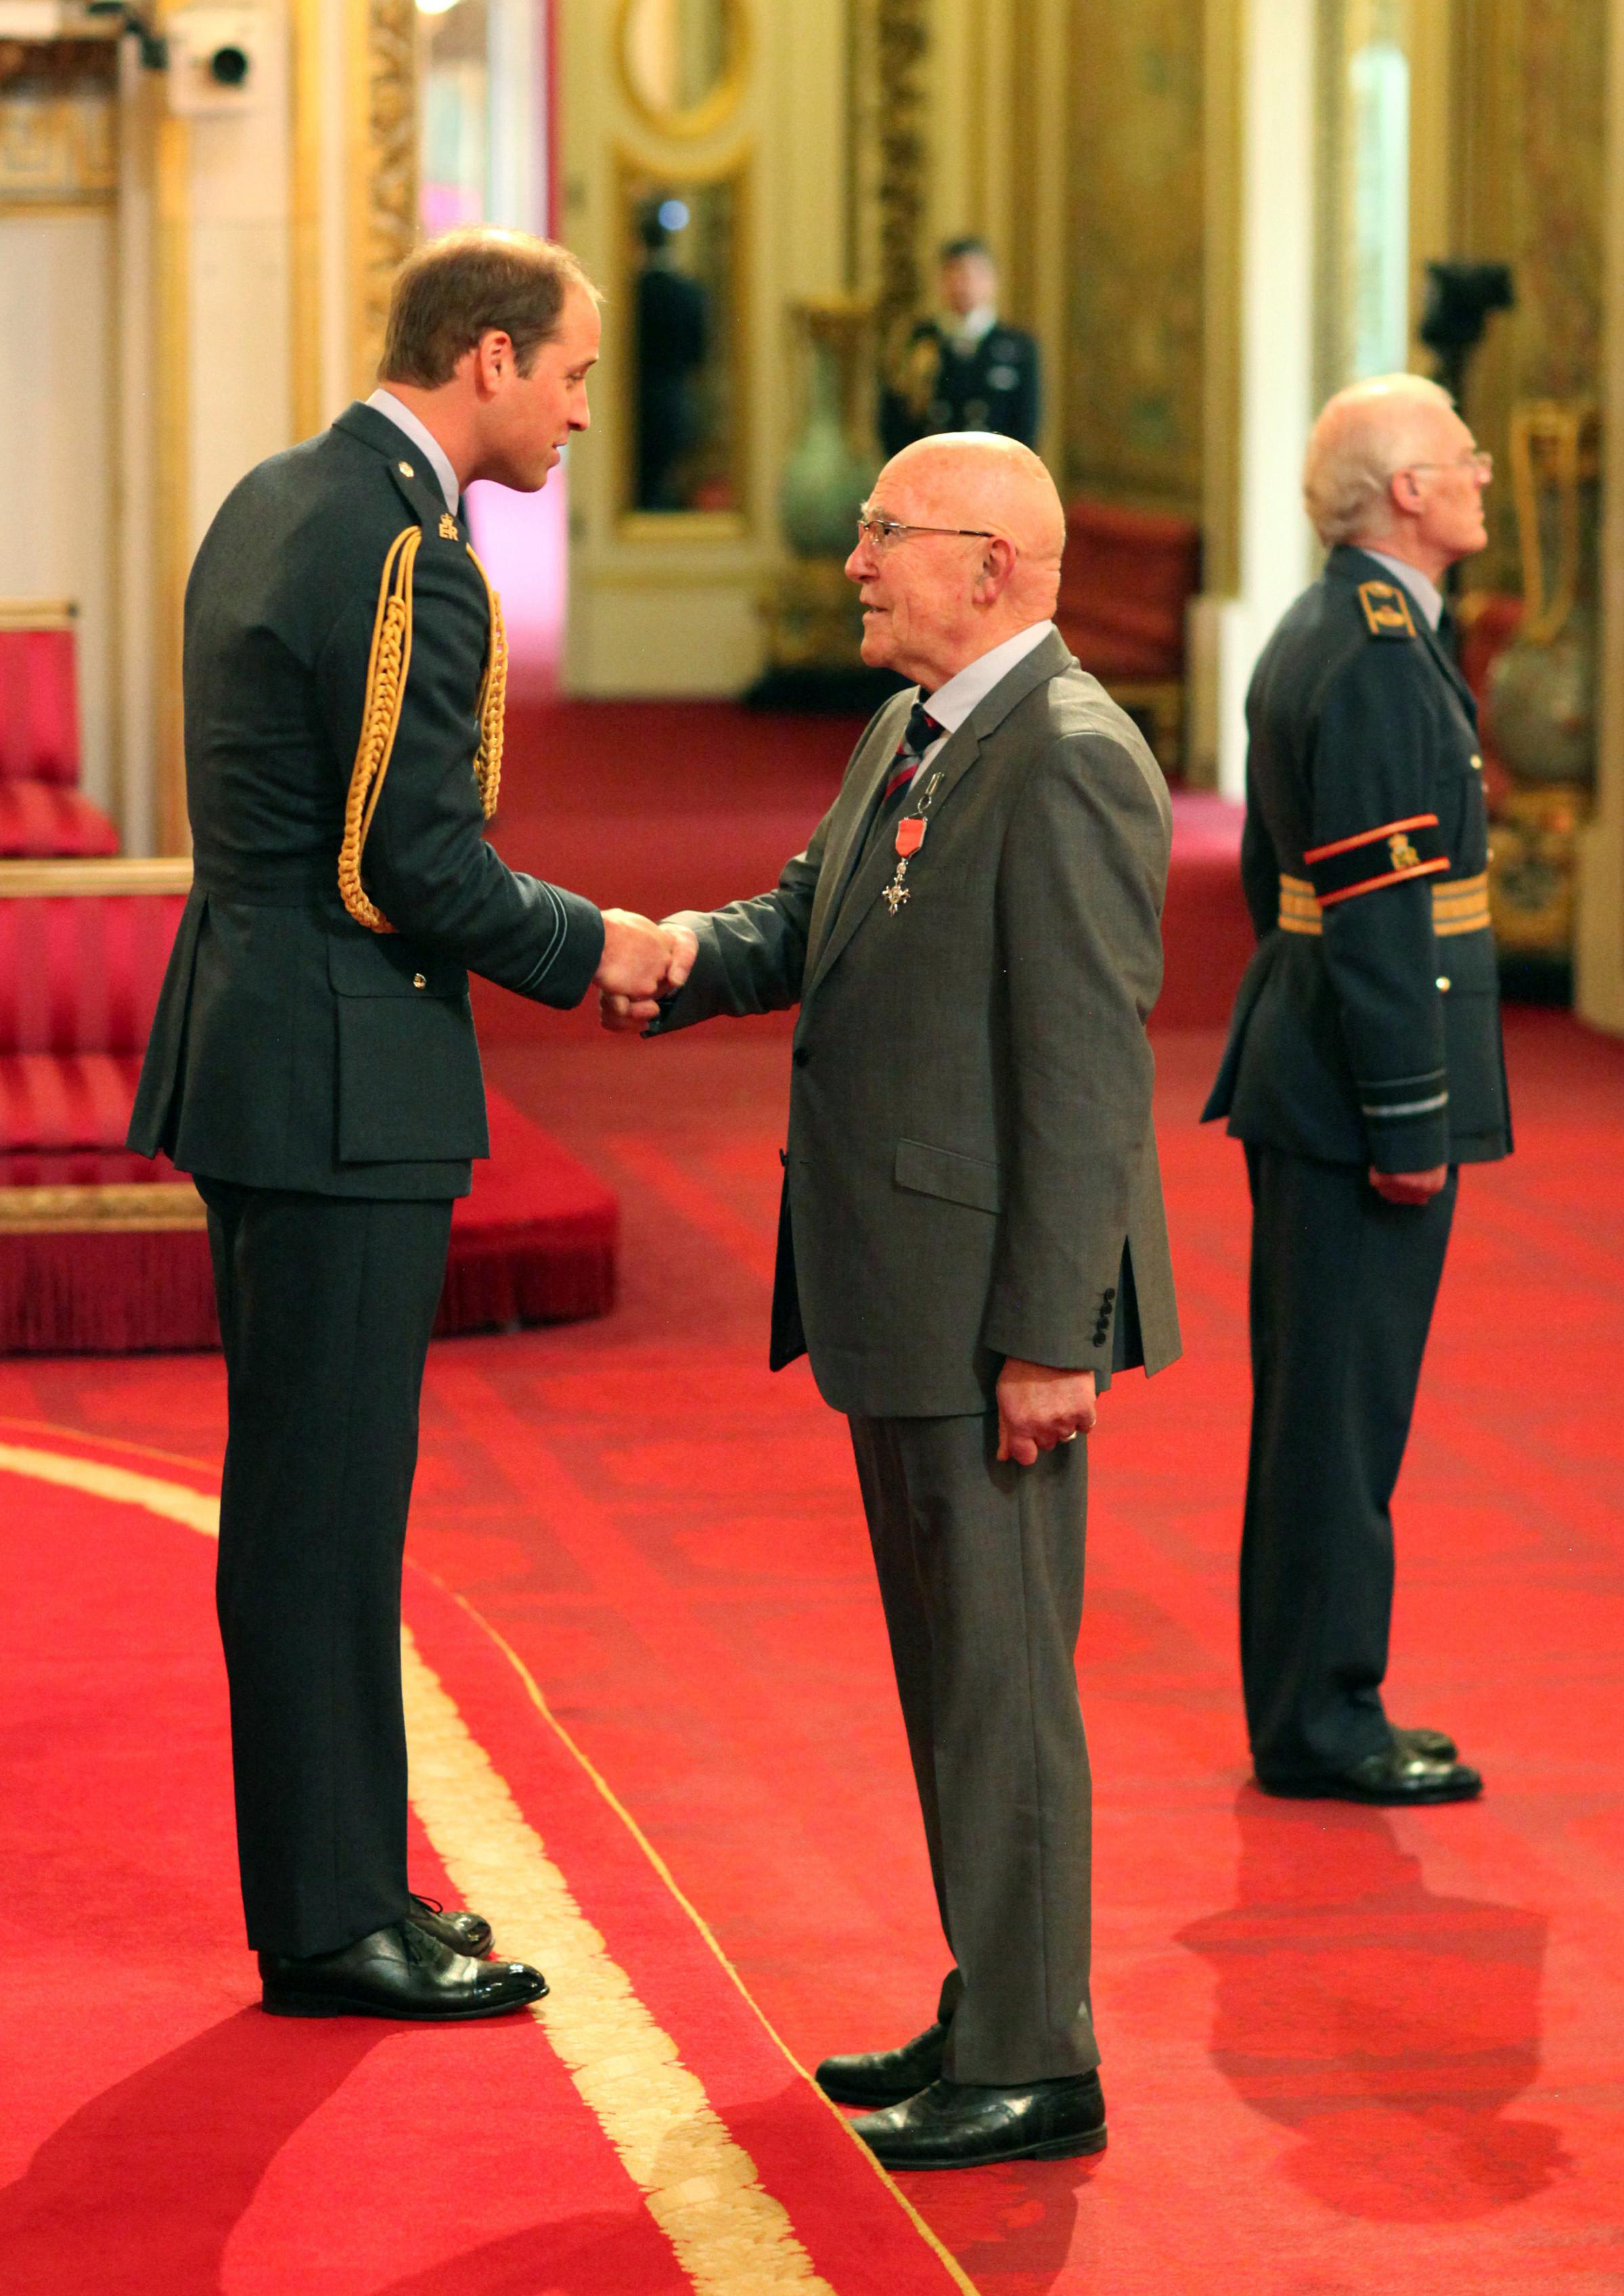 Memorable moment - Geoffrey Williams, from Basildon, is made an MBE by Prince William during a ceremony at Buckingham Palace in March 2014